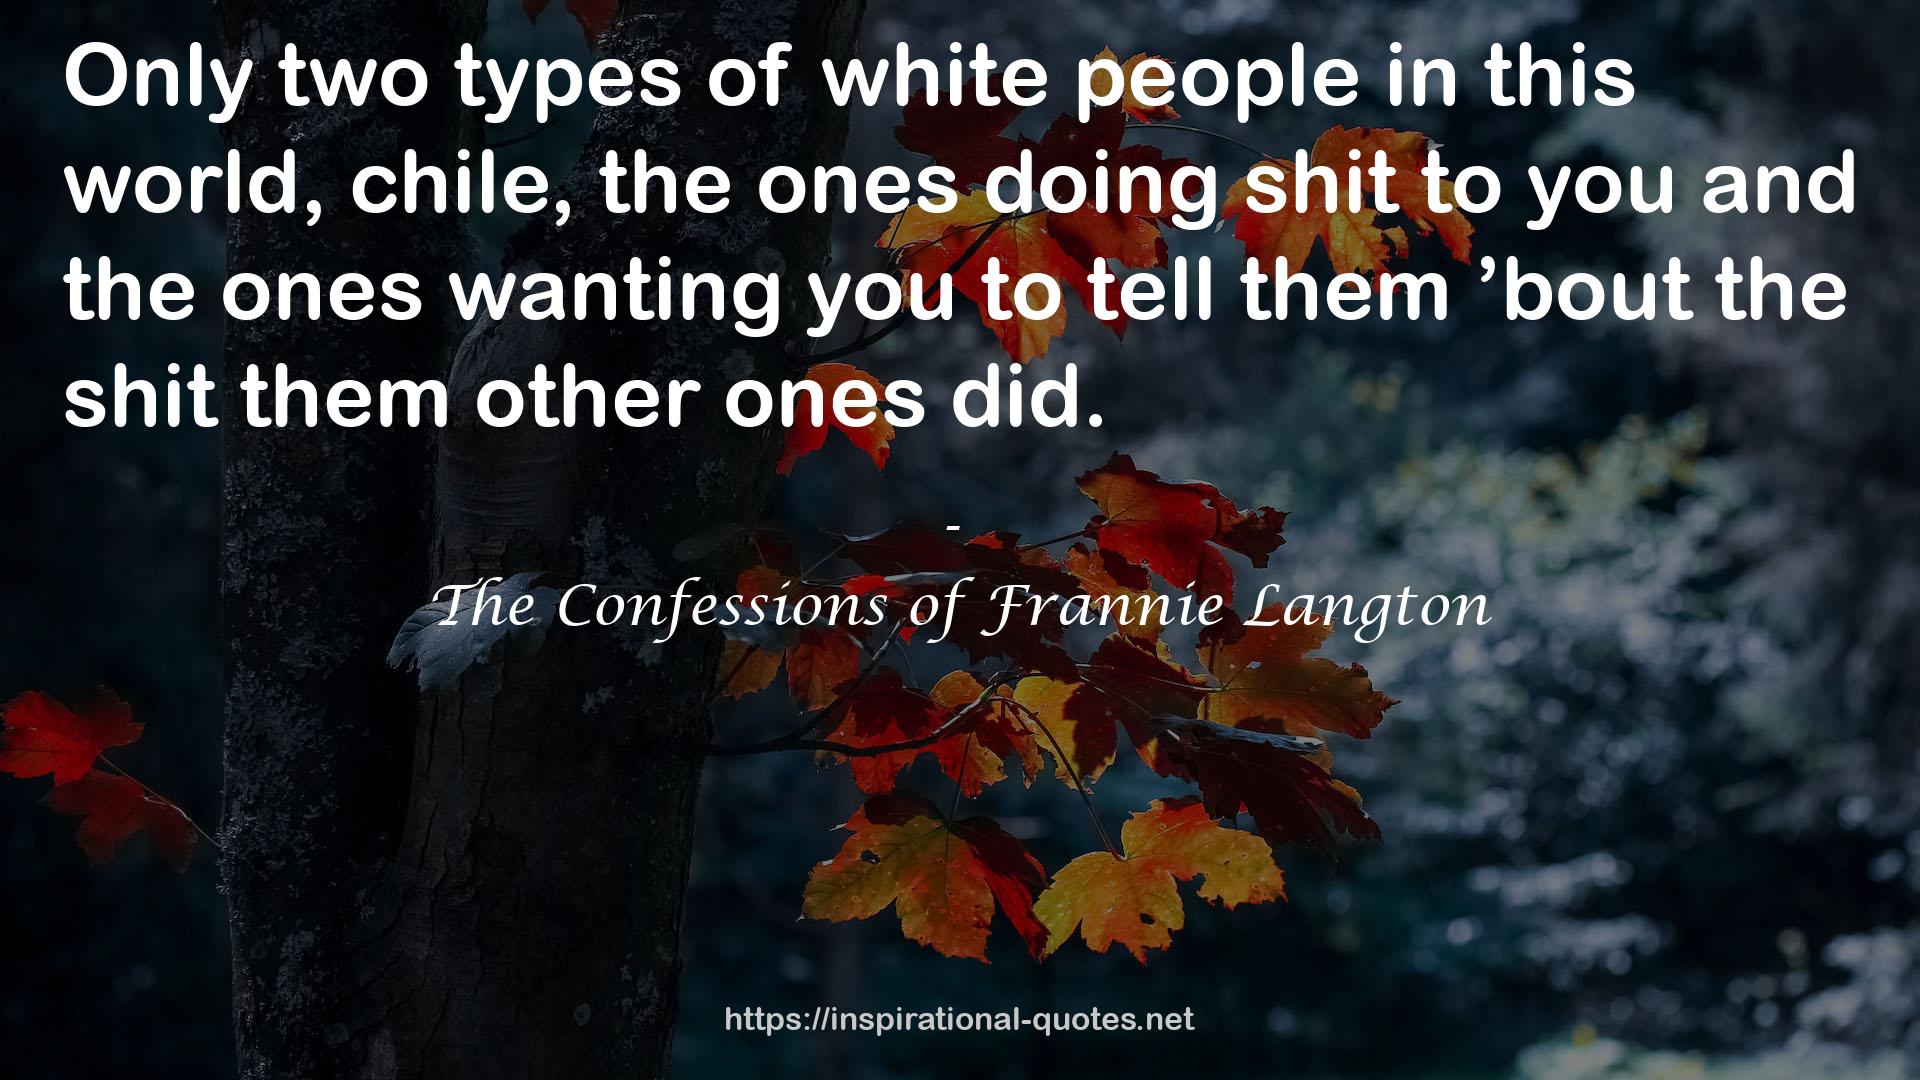 The Confessions of Frannie Langton QUOTES